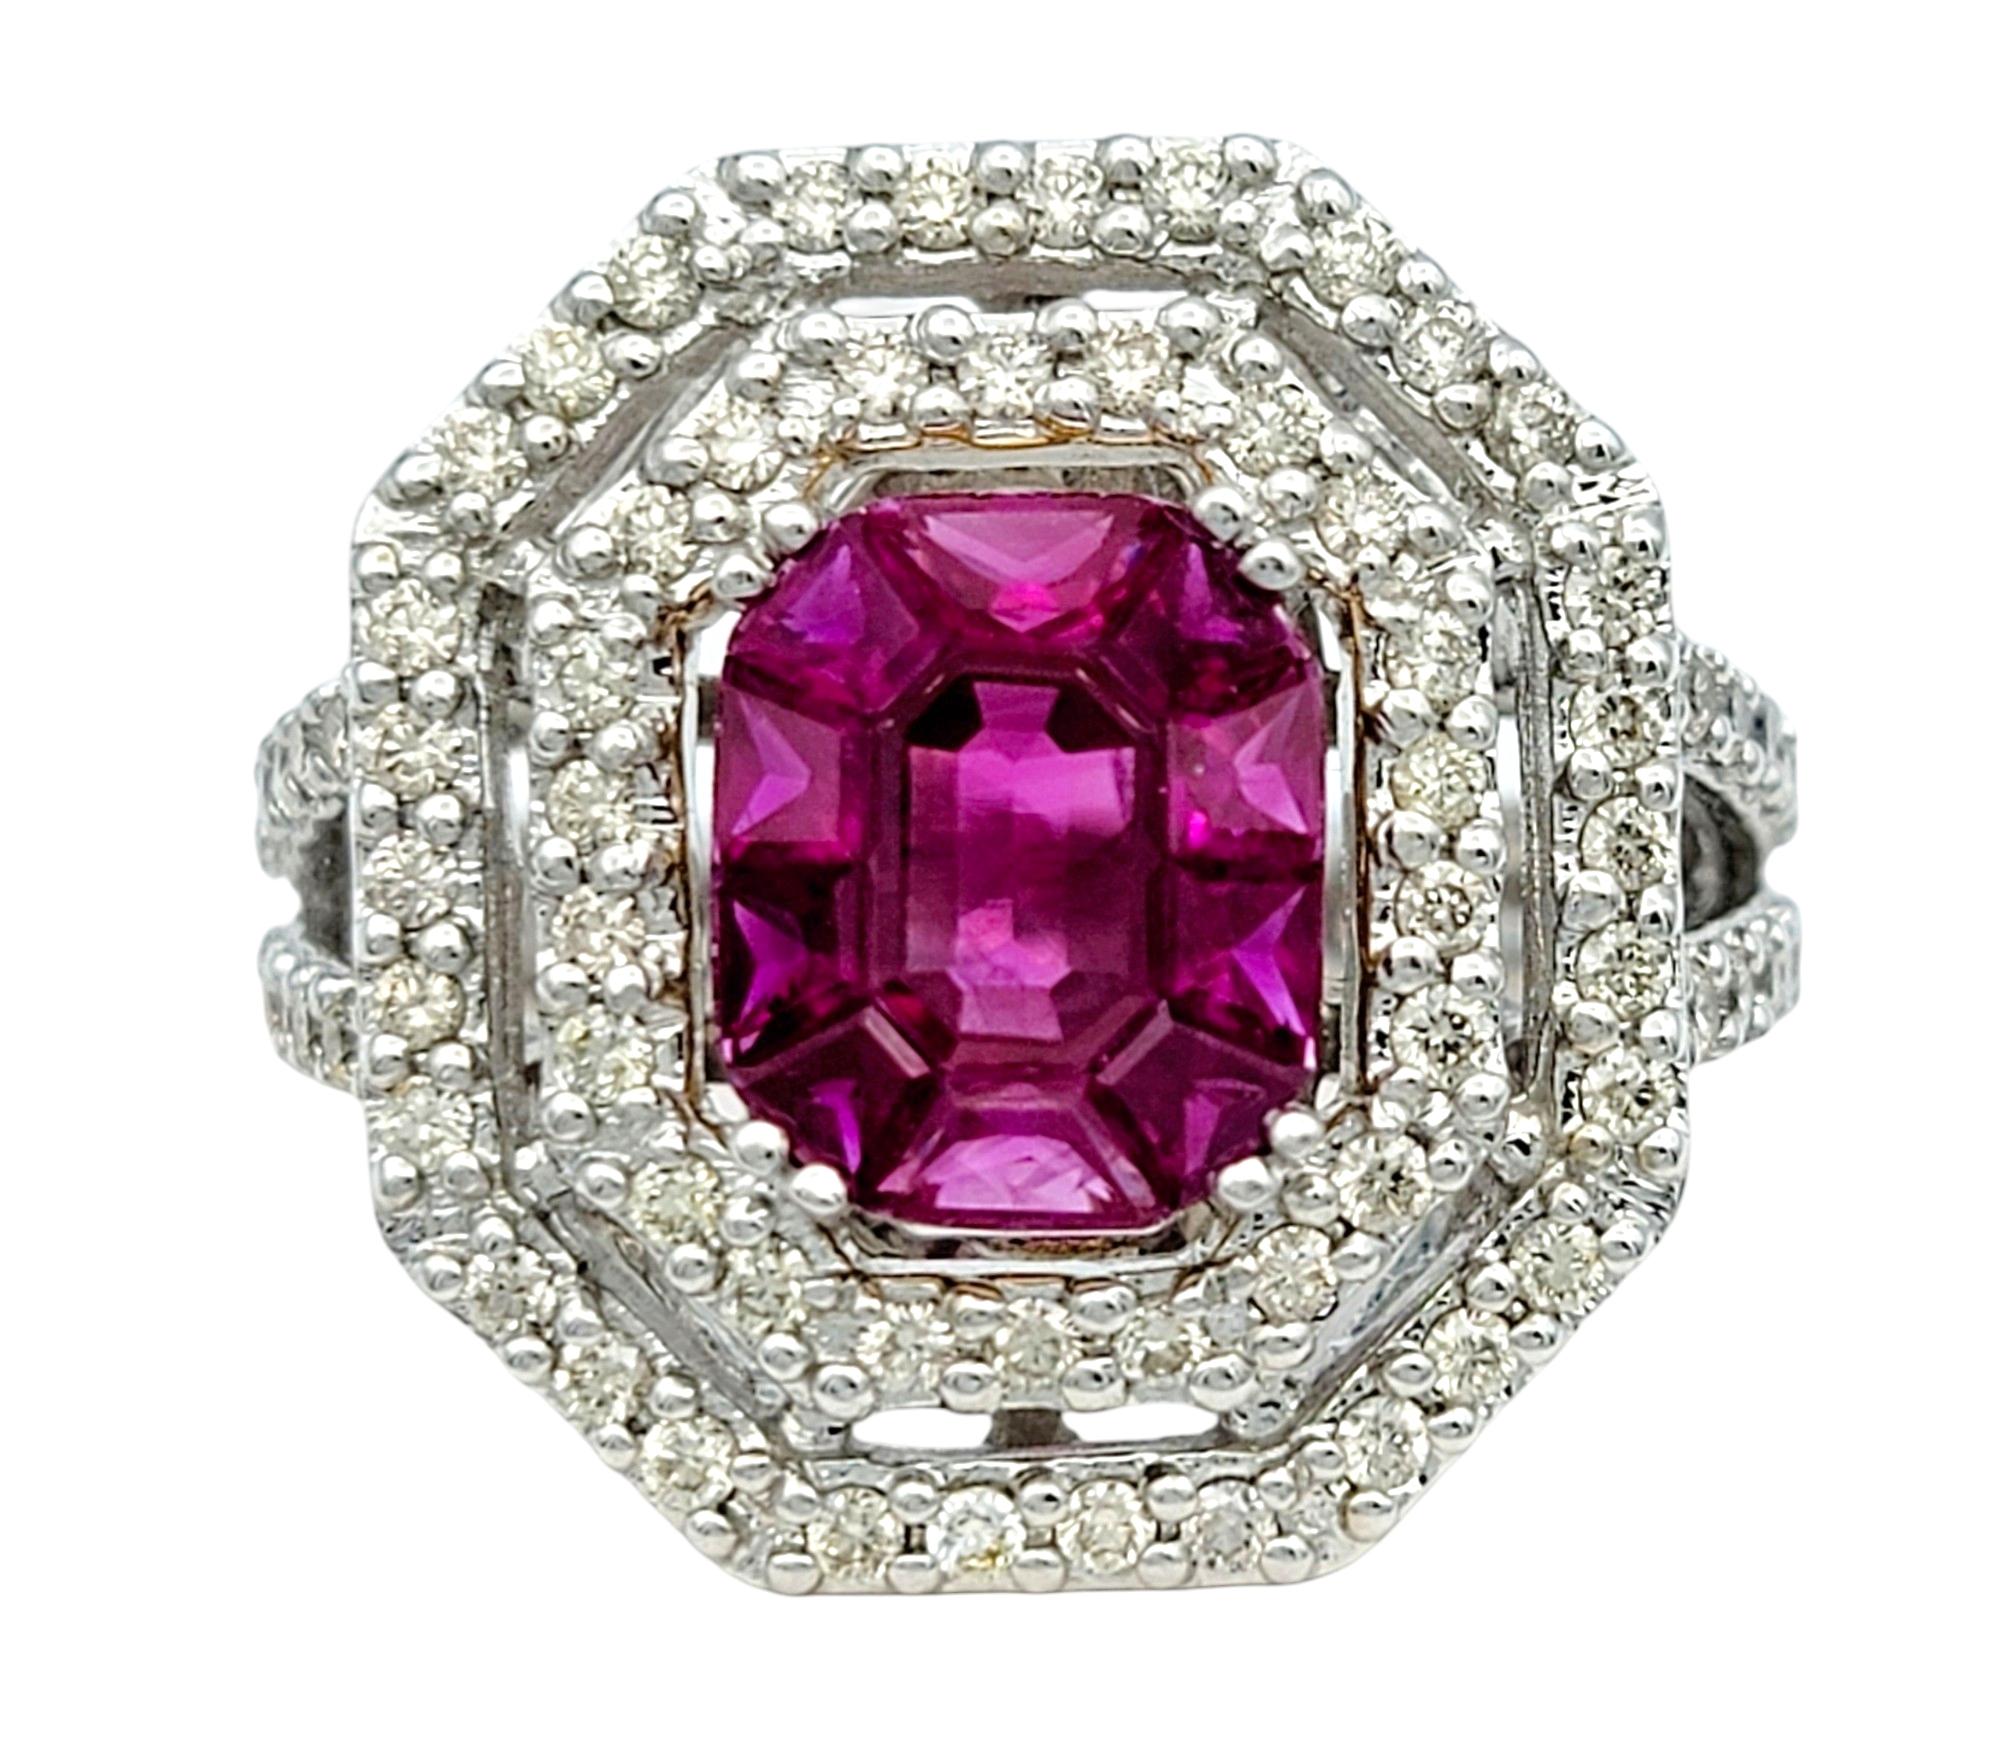 Ring Size: 7

This exquisite 18 karat white gold cocktail ring features a captivating emerald-cut ruby as its centerpiece, surrounded by 10 additional trapezoid cut rubies, creating the illusion of one large vibrant stone. Surrounding the bold